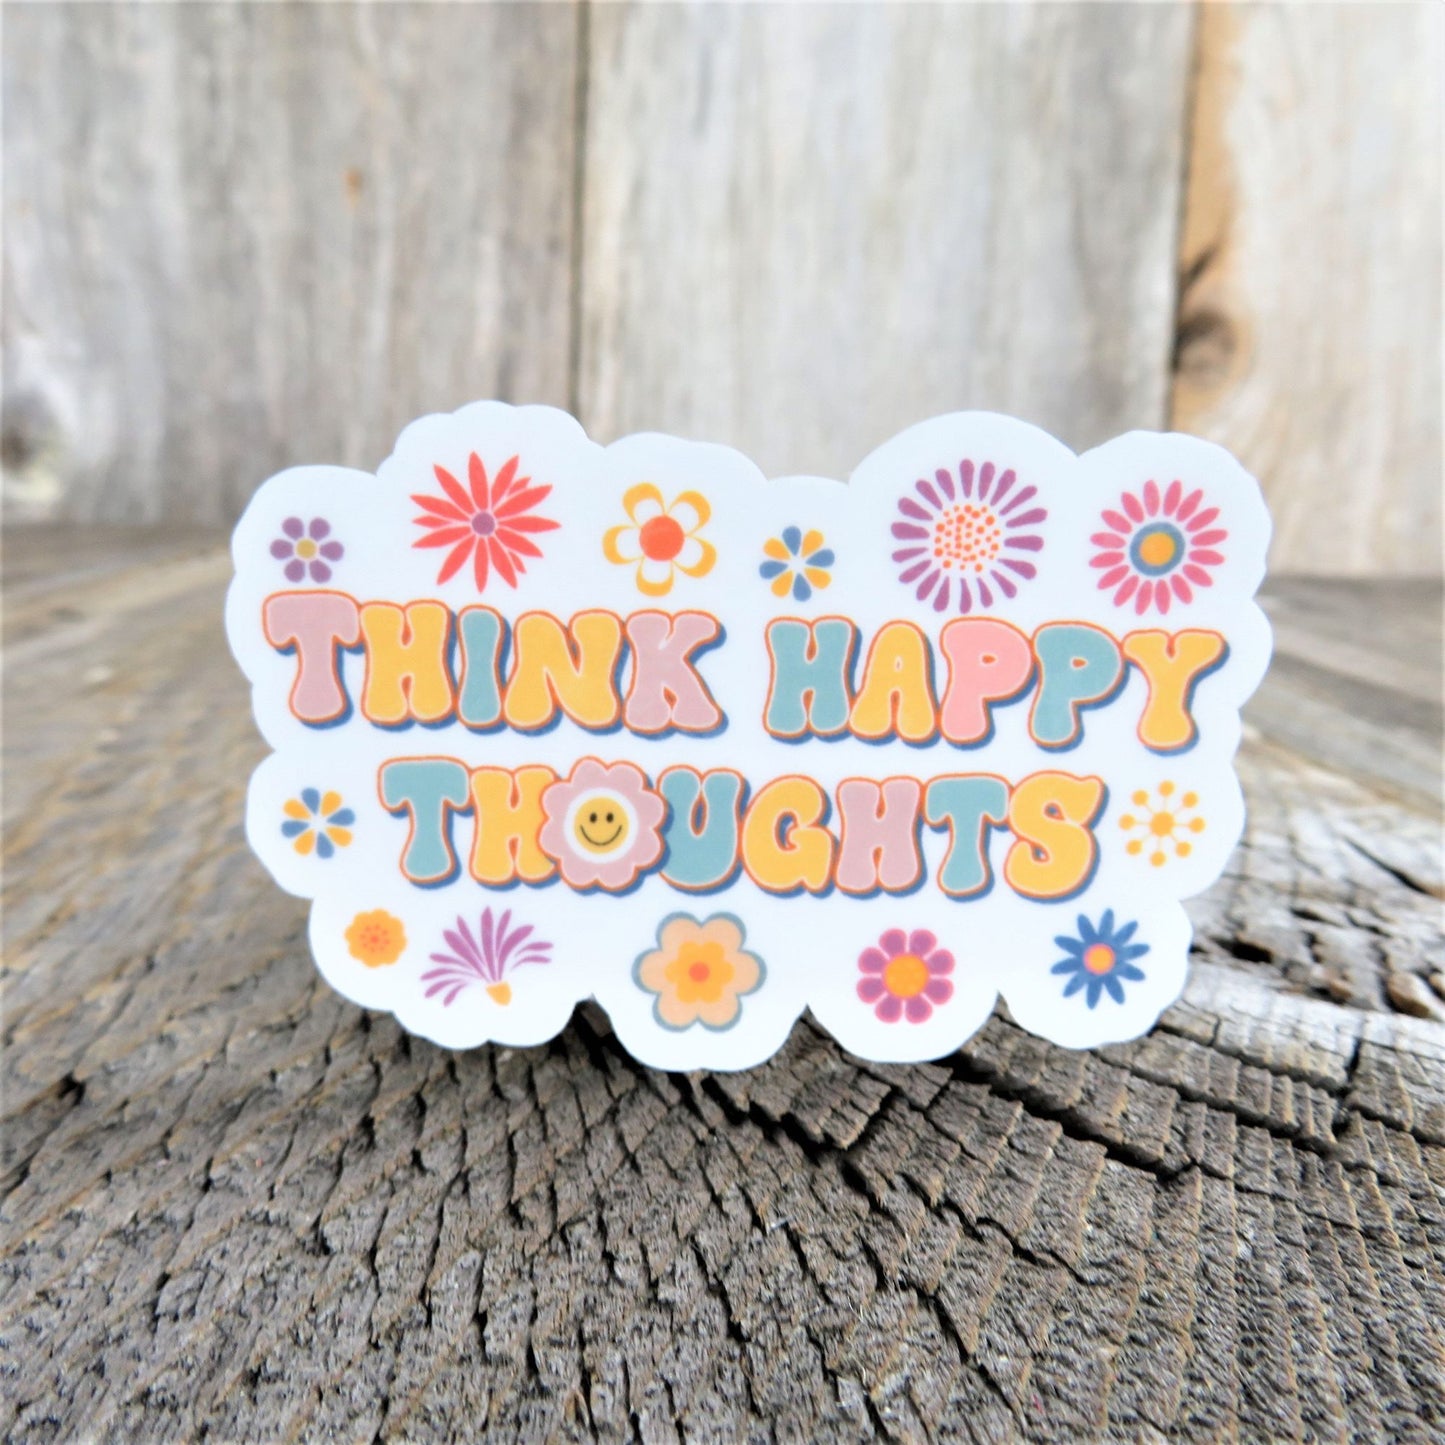 Think Happy Thoughts Sticker Flower Power 70s Style Decal Full Color Waterproof Hippie Car Water Bottle Laptop